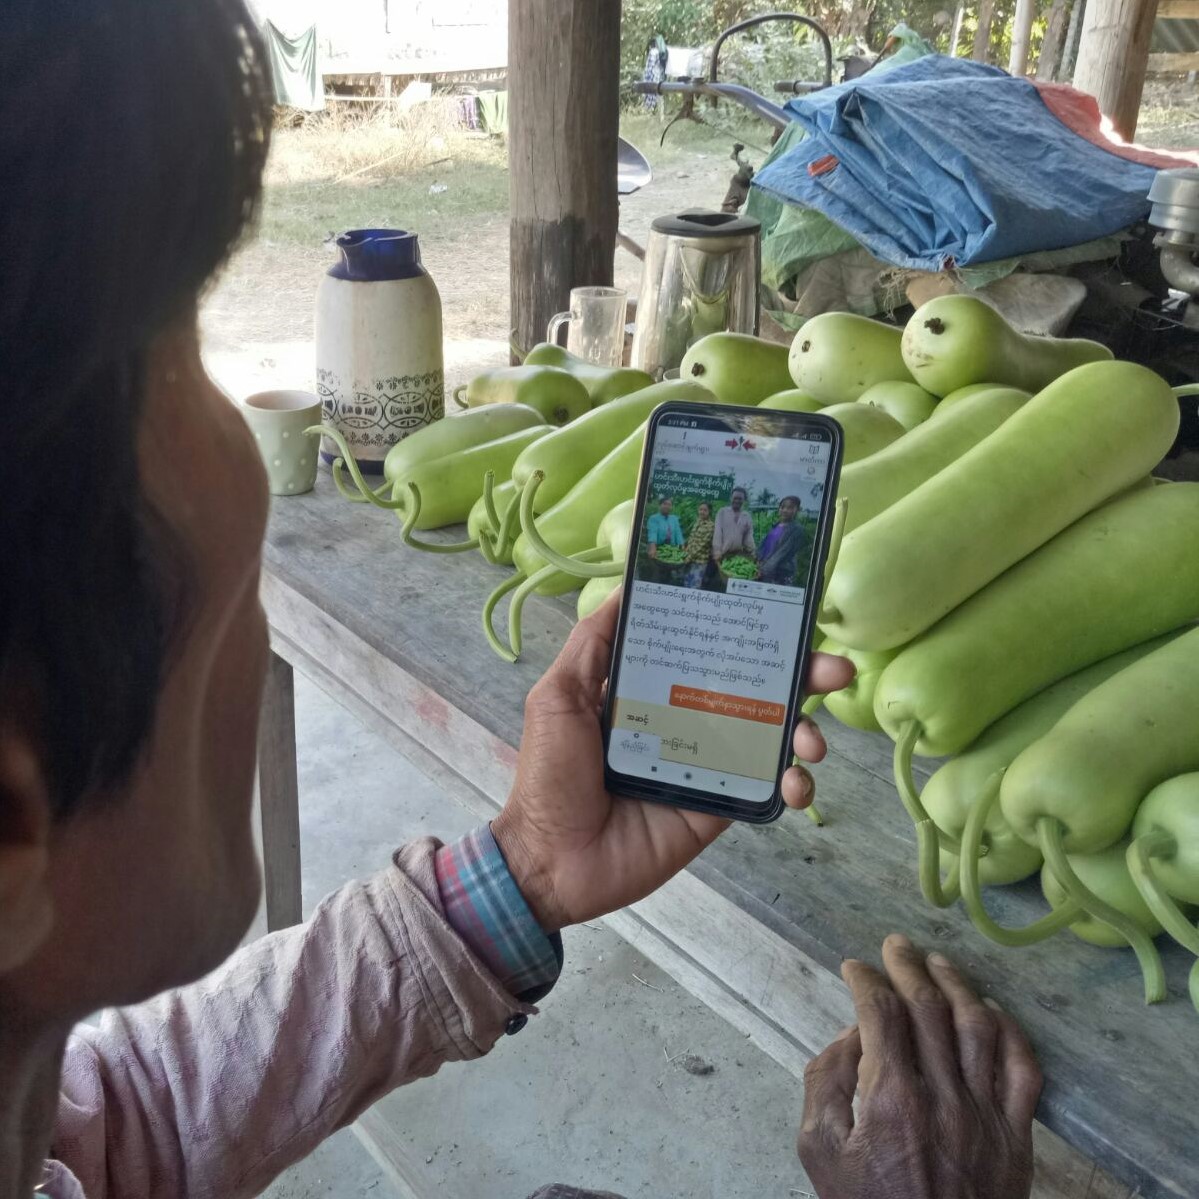 A farmer looks at their phone, which is showing the VeggieTap interface